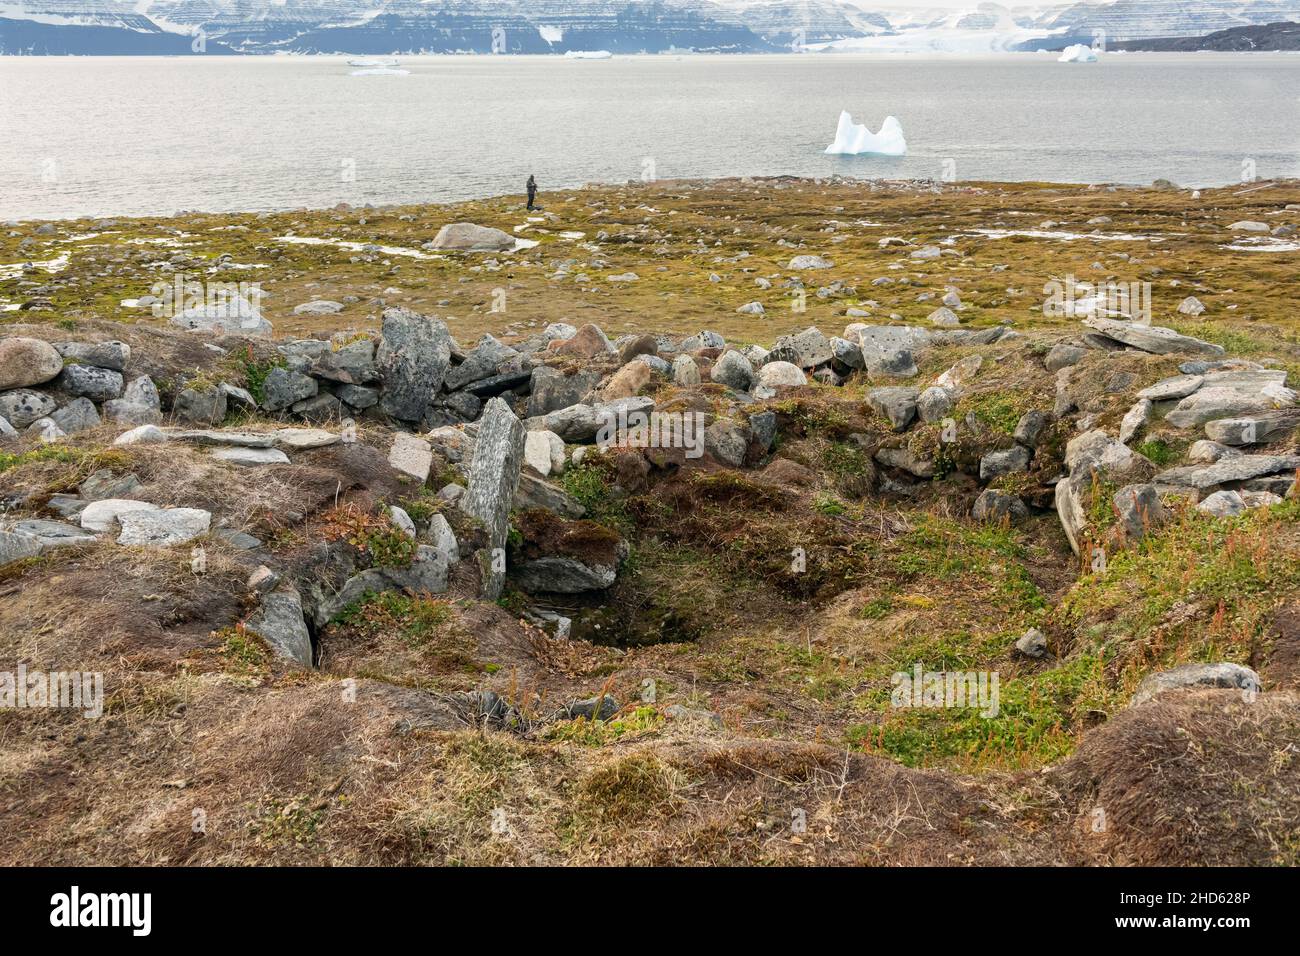 Historic Thule village site with rock and turf winter houses and low level entrances, Danmark O, Forfjord, Scoresby Sund, Greenland Stock Photo